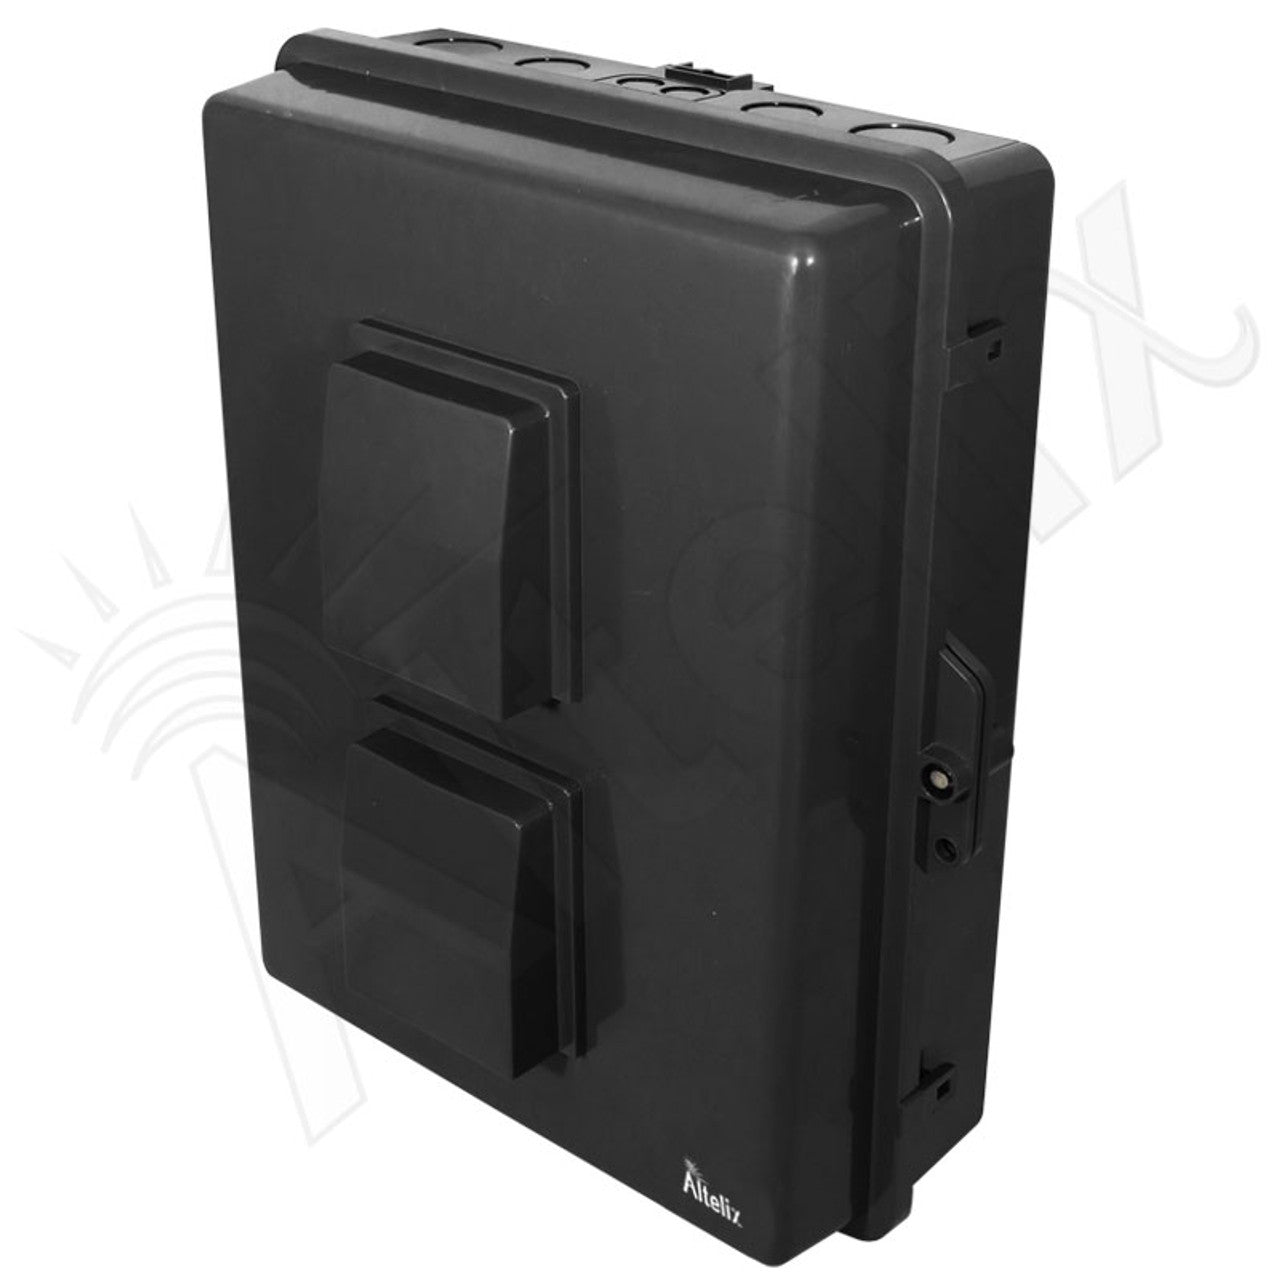 Buy black Altelix 17x14x6 Inch Polycarbonate + ABS Vented Weatherproof NEMA Enclosure with Aluminum Mounting Plate